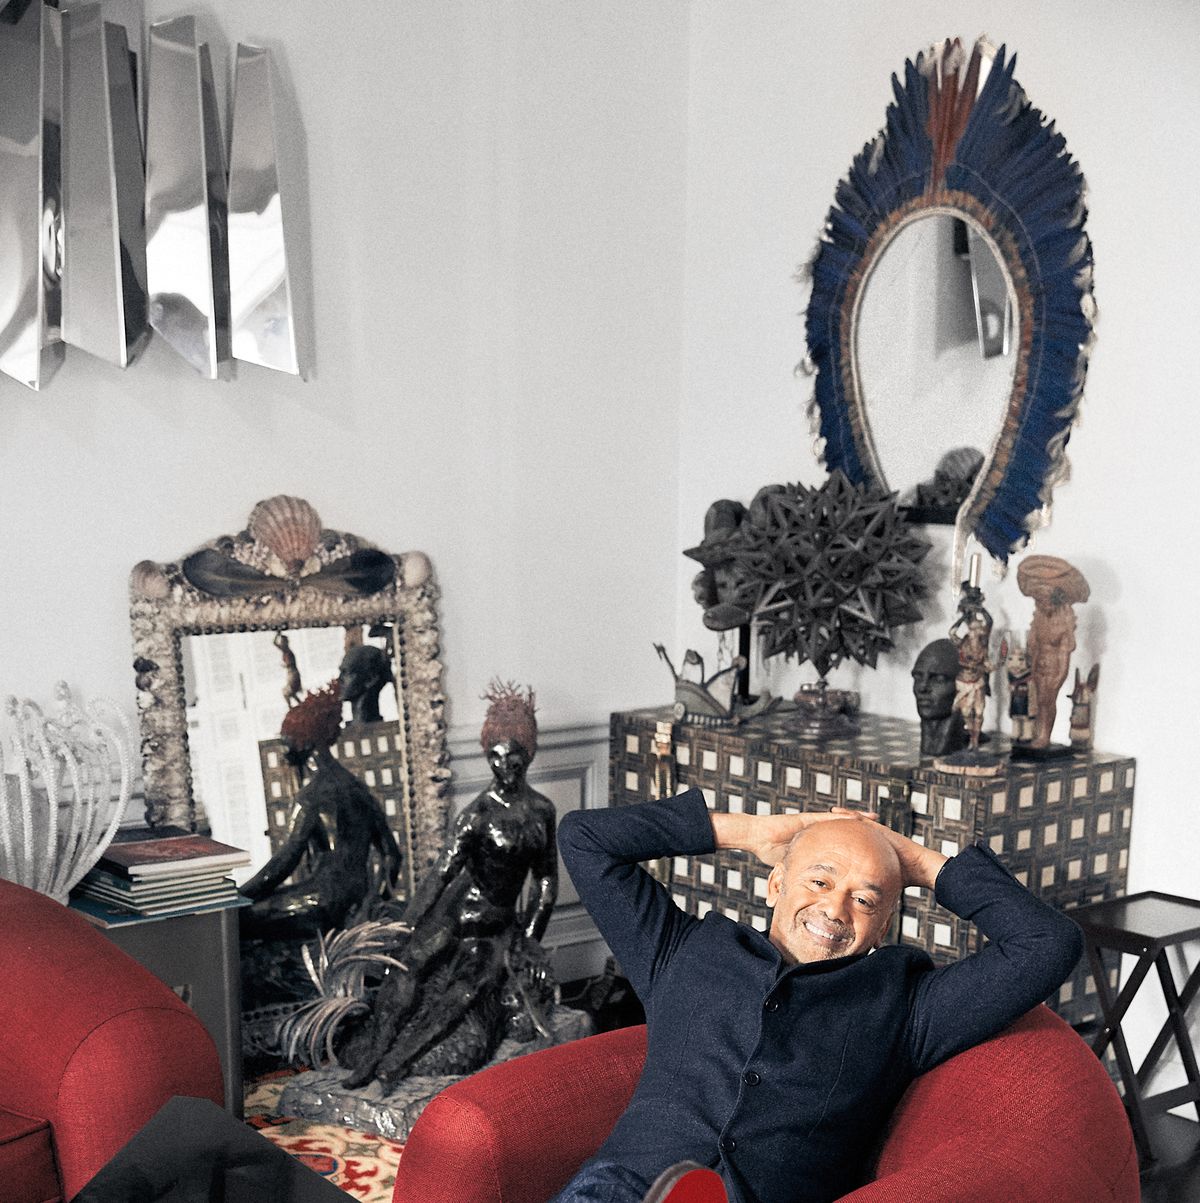 Christian Louboutin Shoes Photo Shoot - At Home in Paris